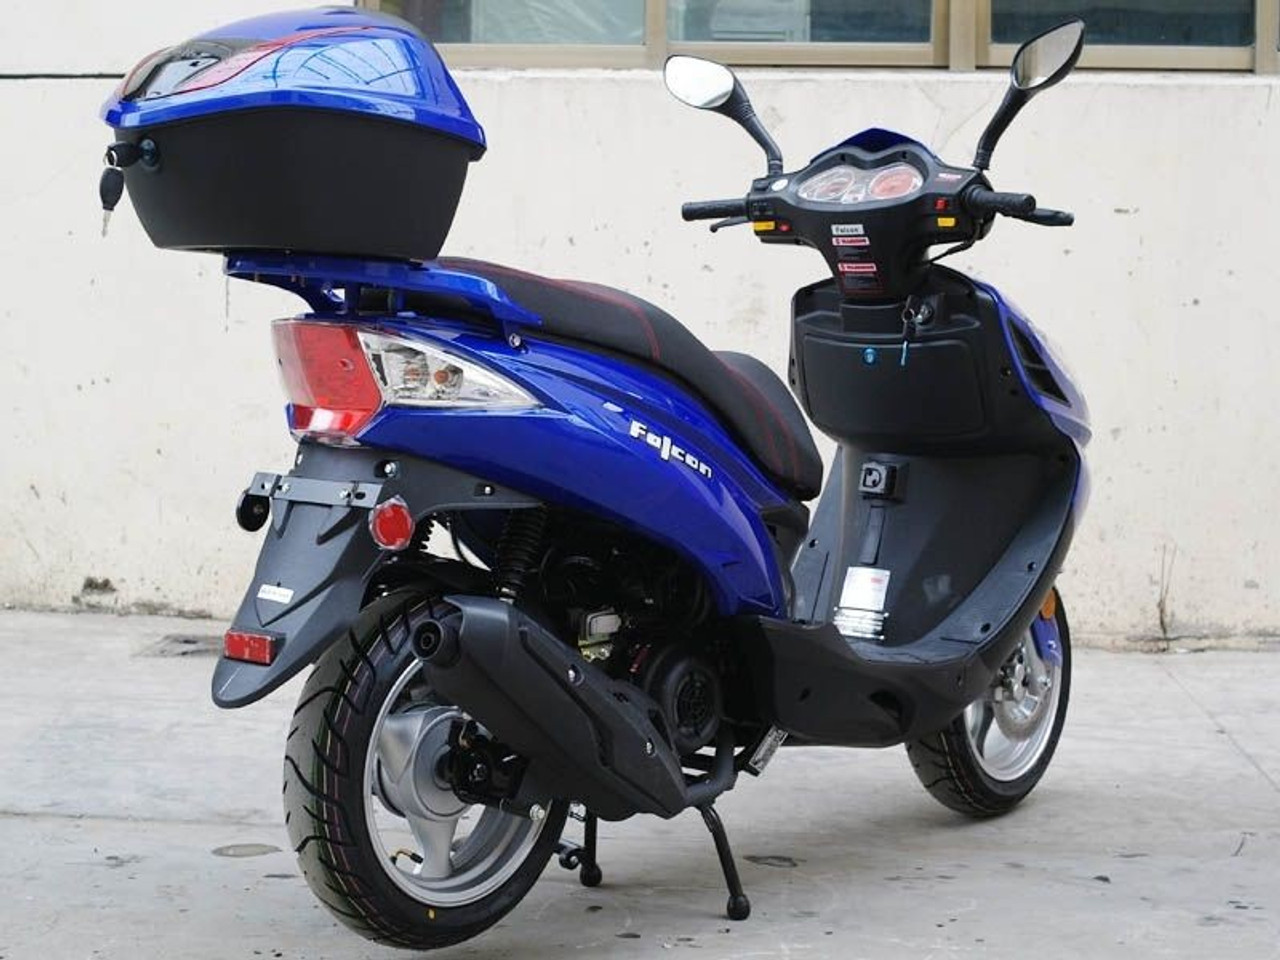 DongFang Falcon 200Cc Moped Scooter,Automatic CVT Engine, Big Wheel And Body